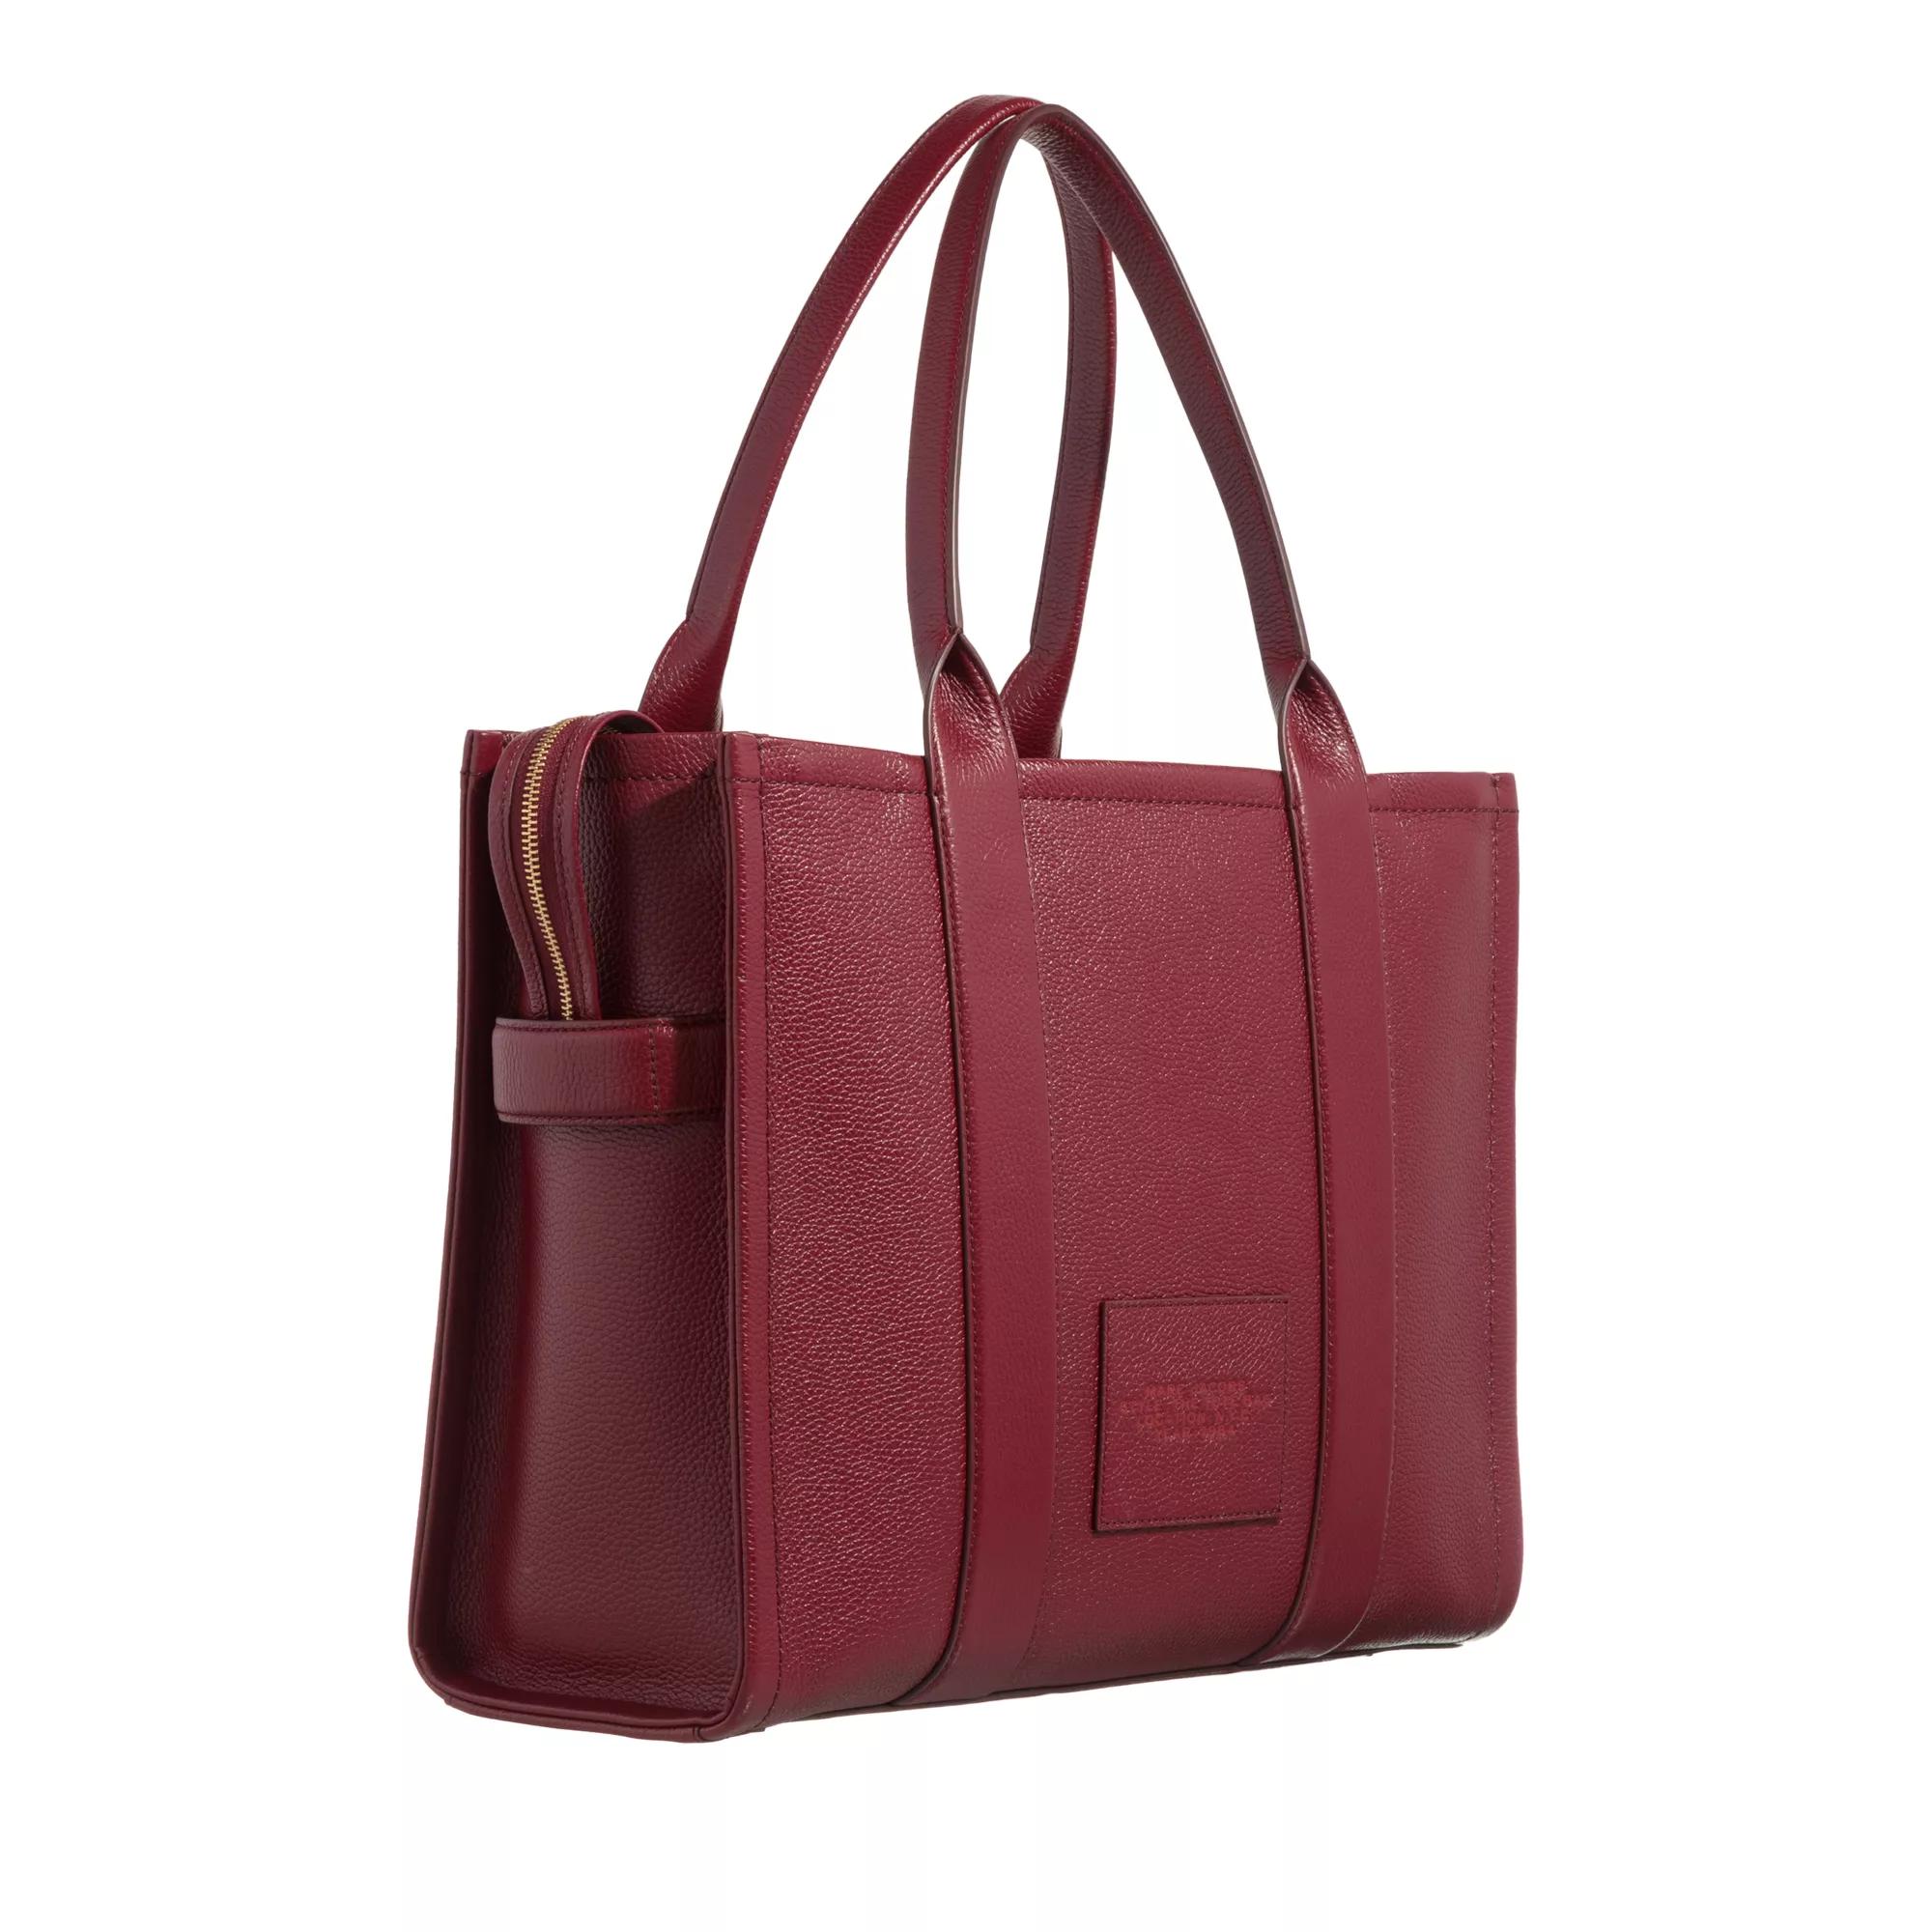 Marc Jacobs Totes The Leather Tote Bag in rood